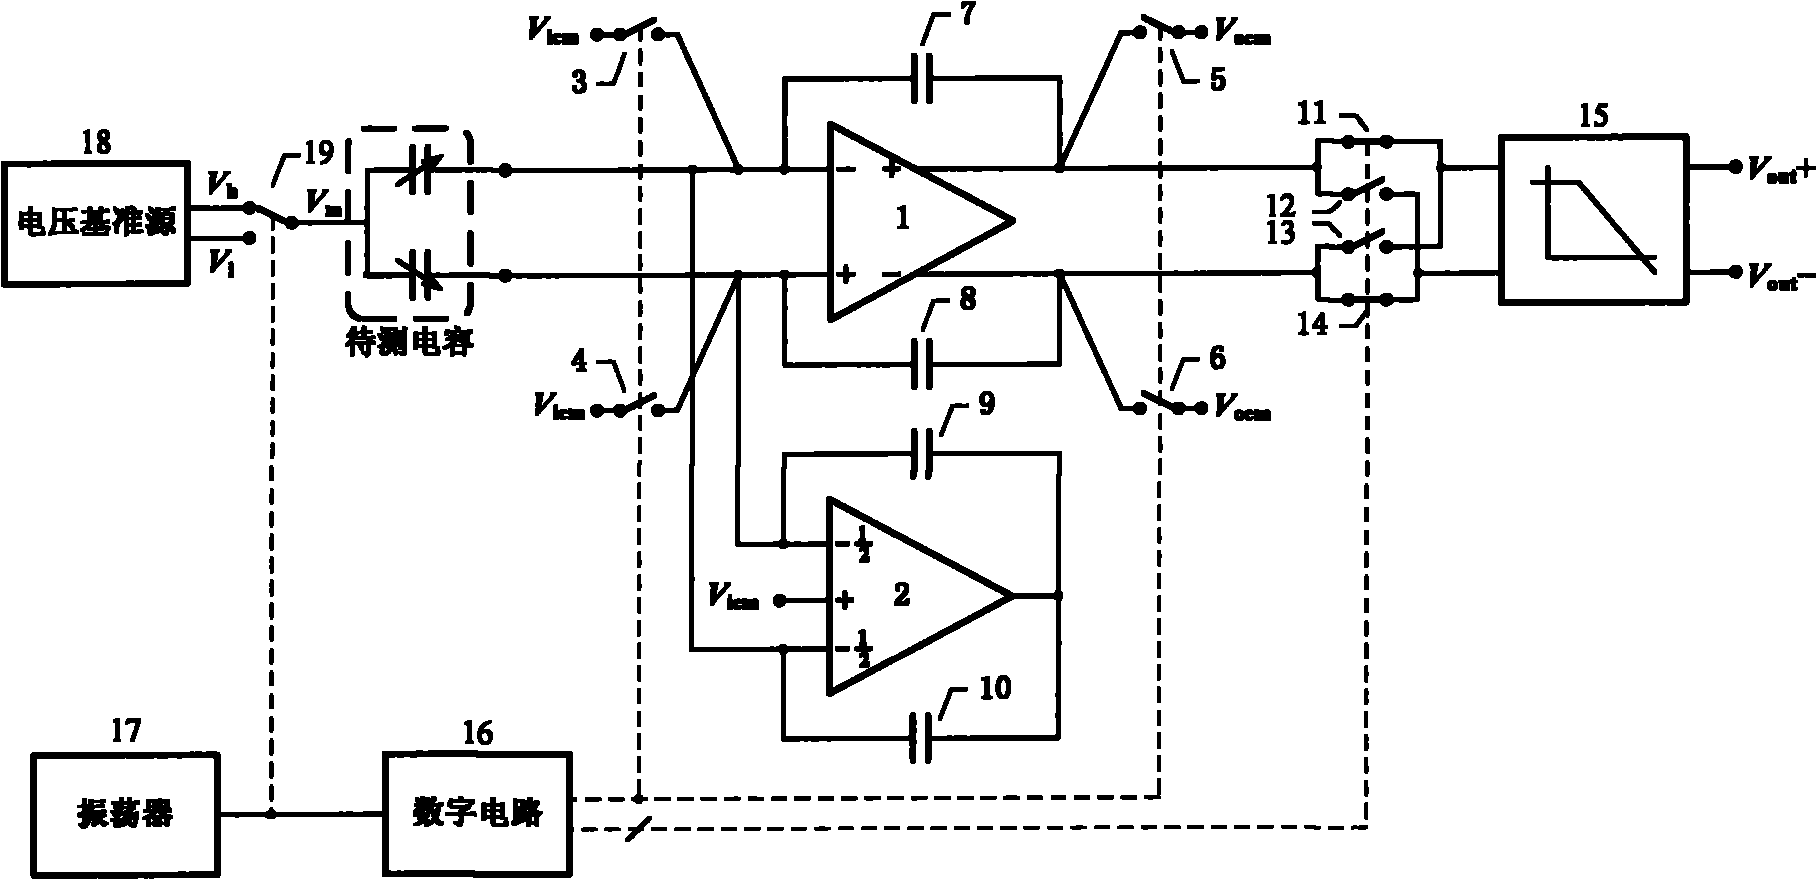 High accuracy capacitive readout circuit with temperature compensation